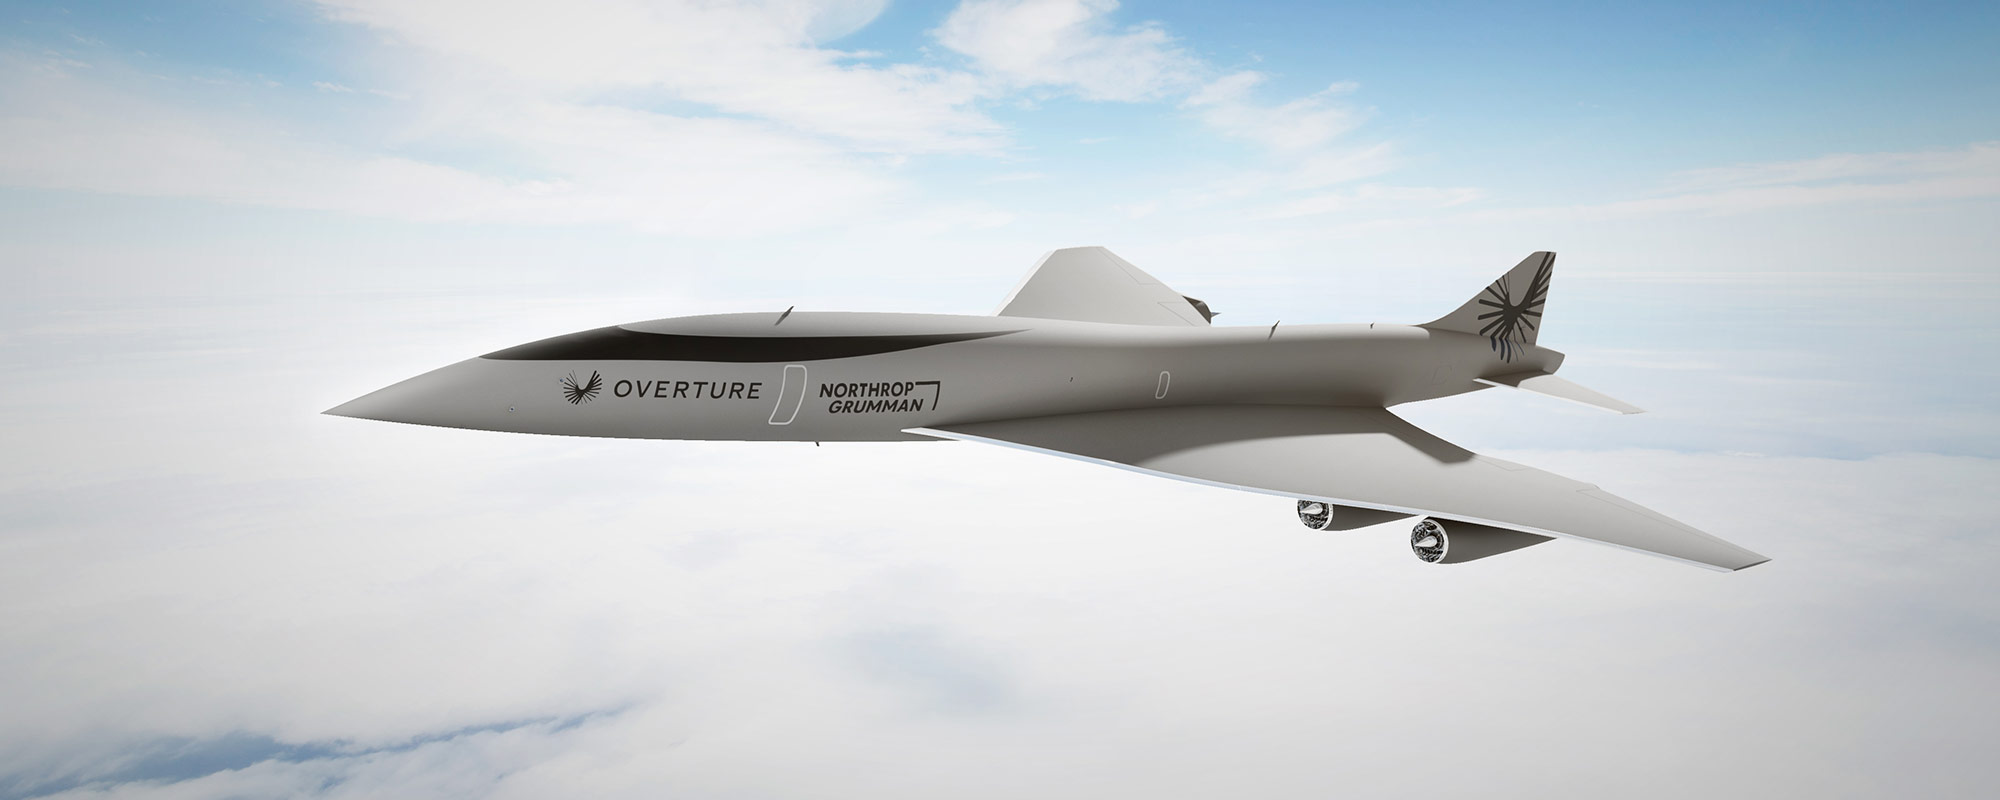 supersonic aircraft above the clouds